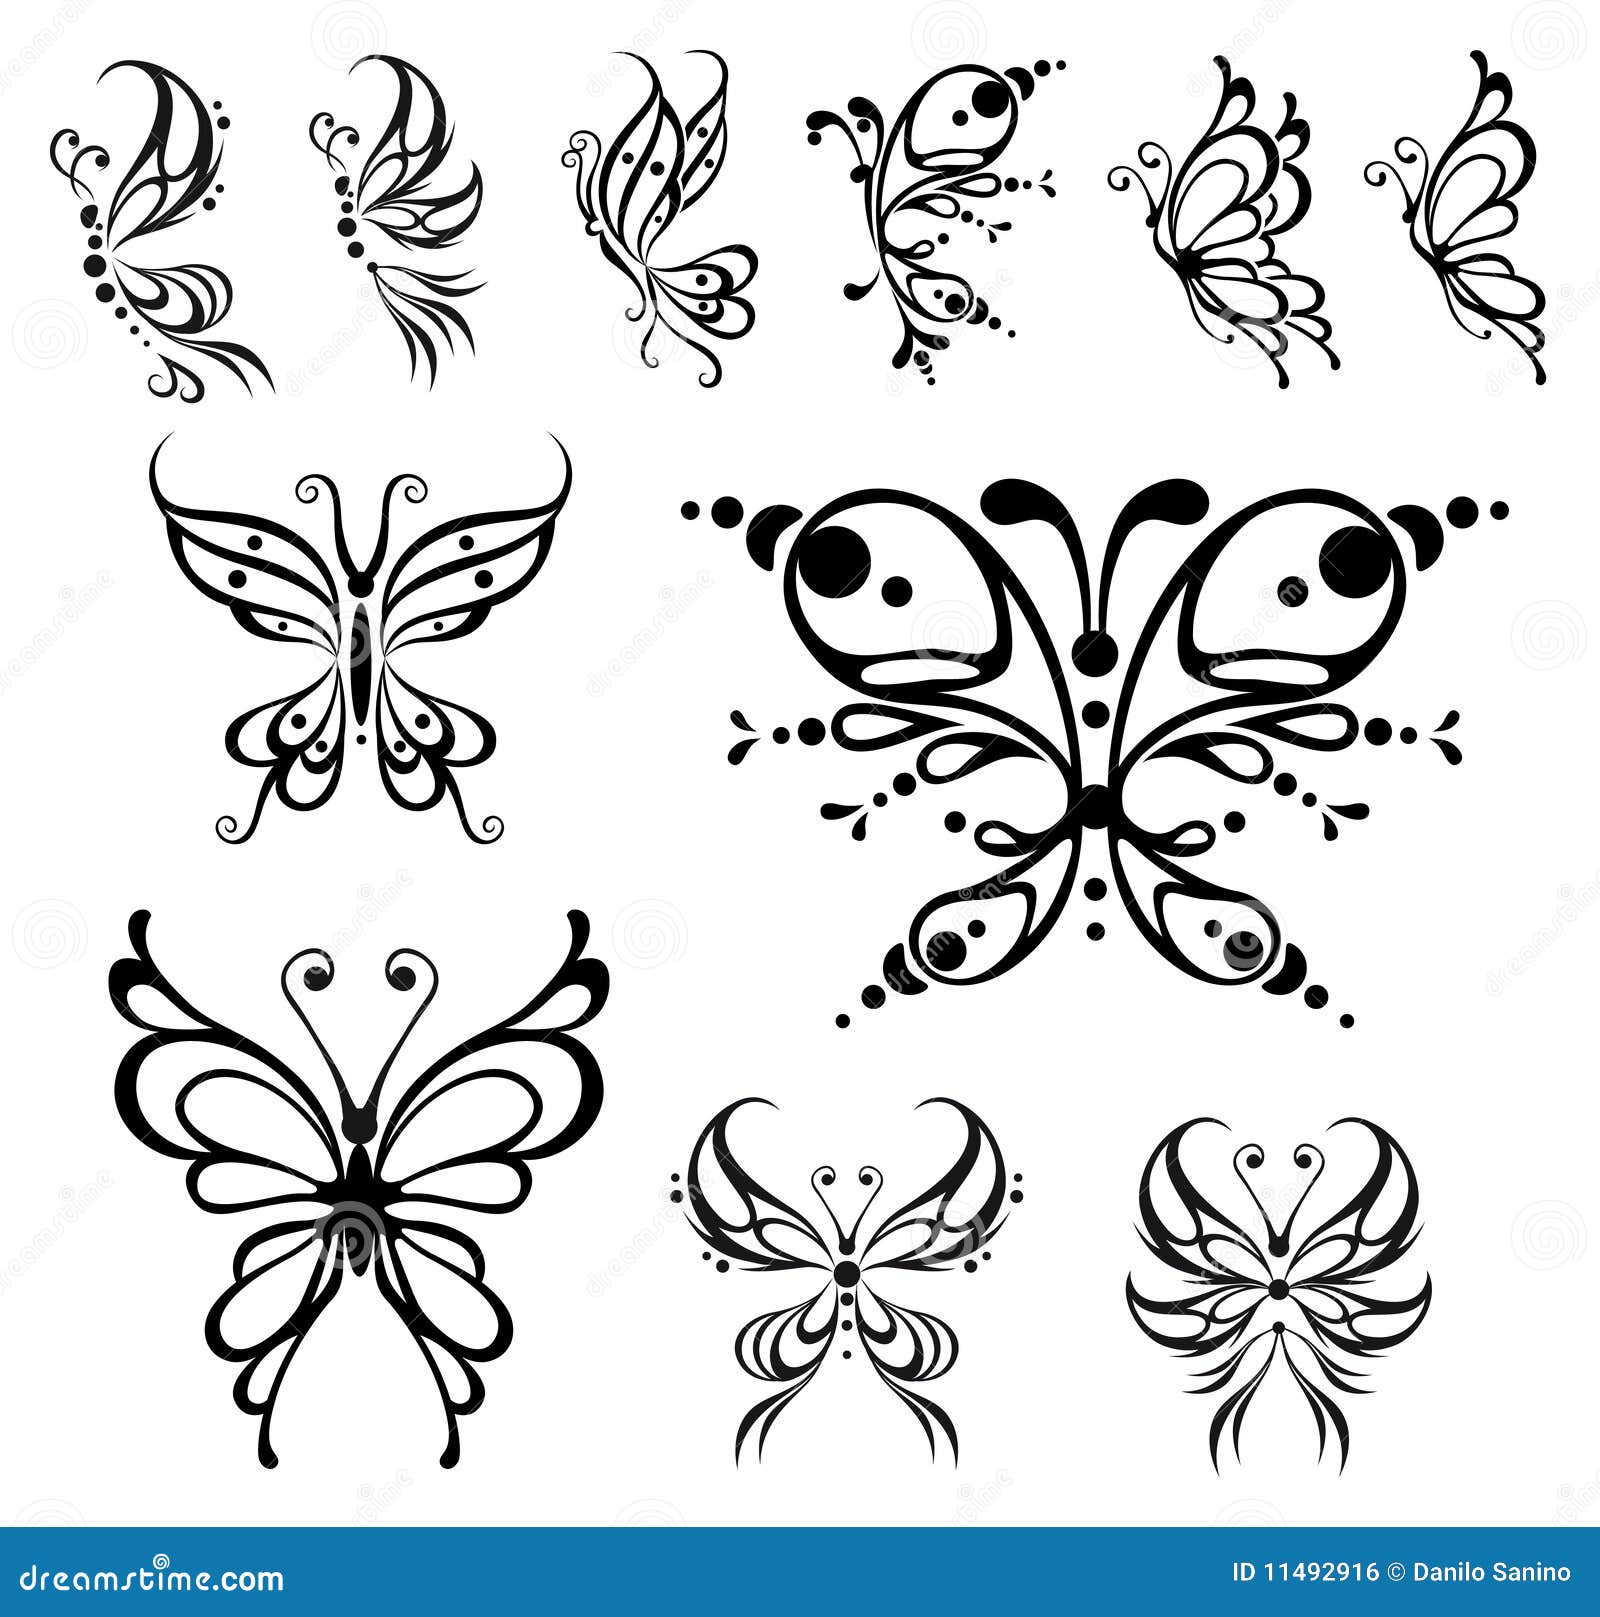 Butterfly tattoo. stock vector. Illustration of symmetrical - 11492916